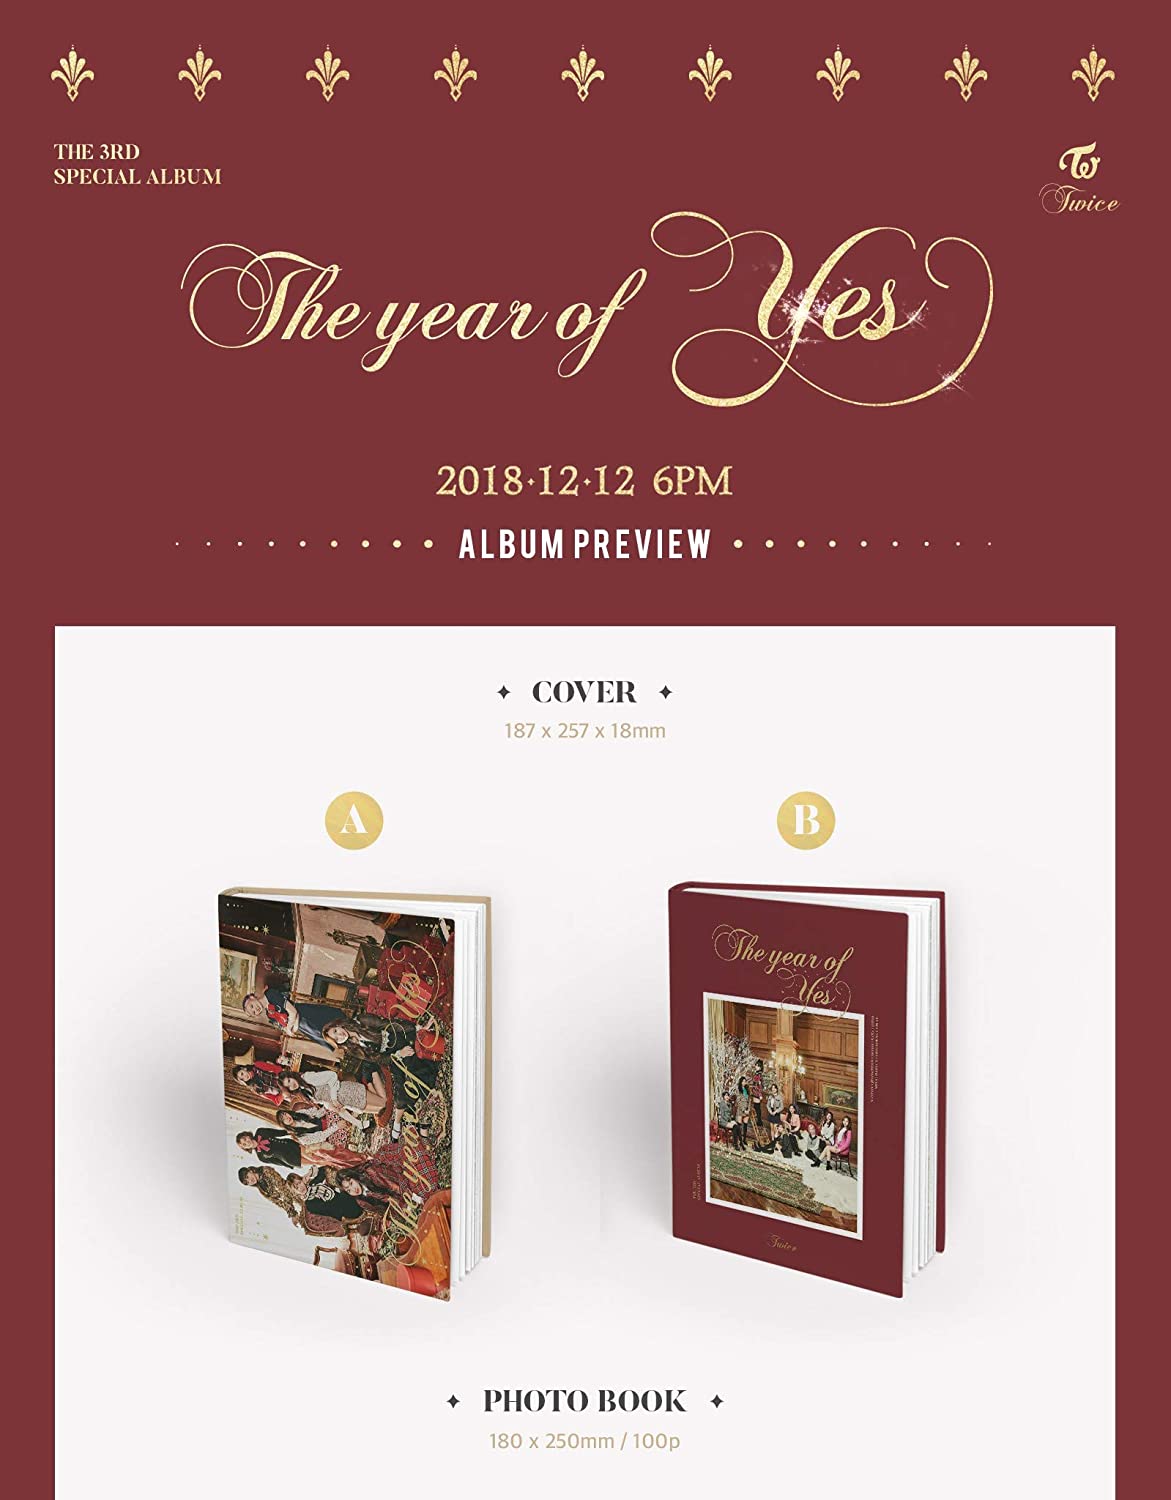 Twice Special Album Vol. 3 - The Year of "Yes"